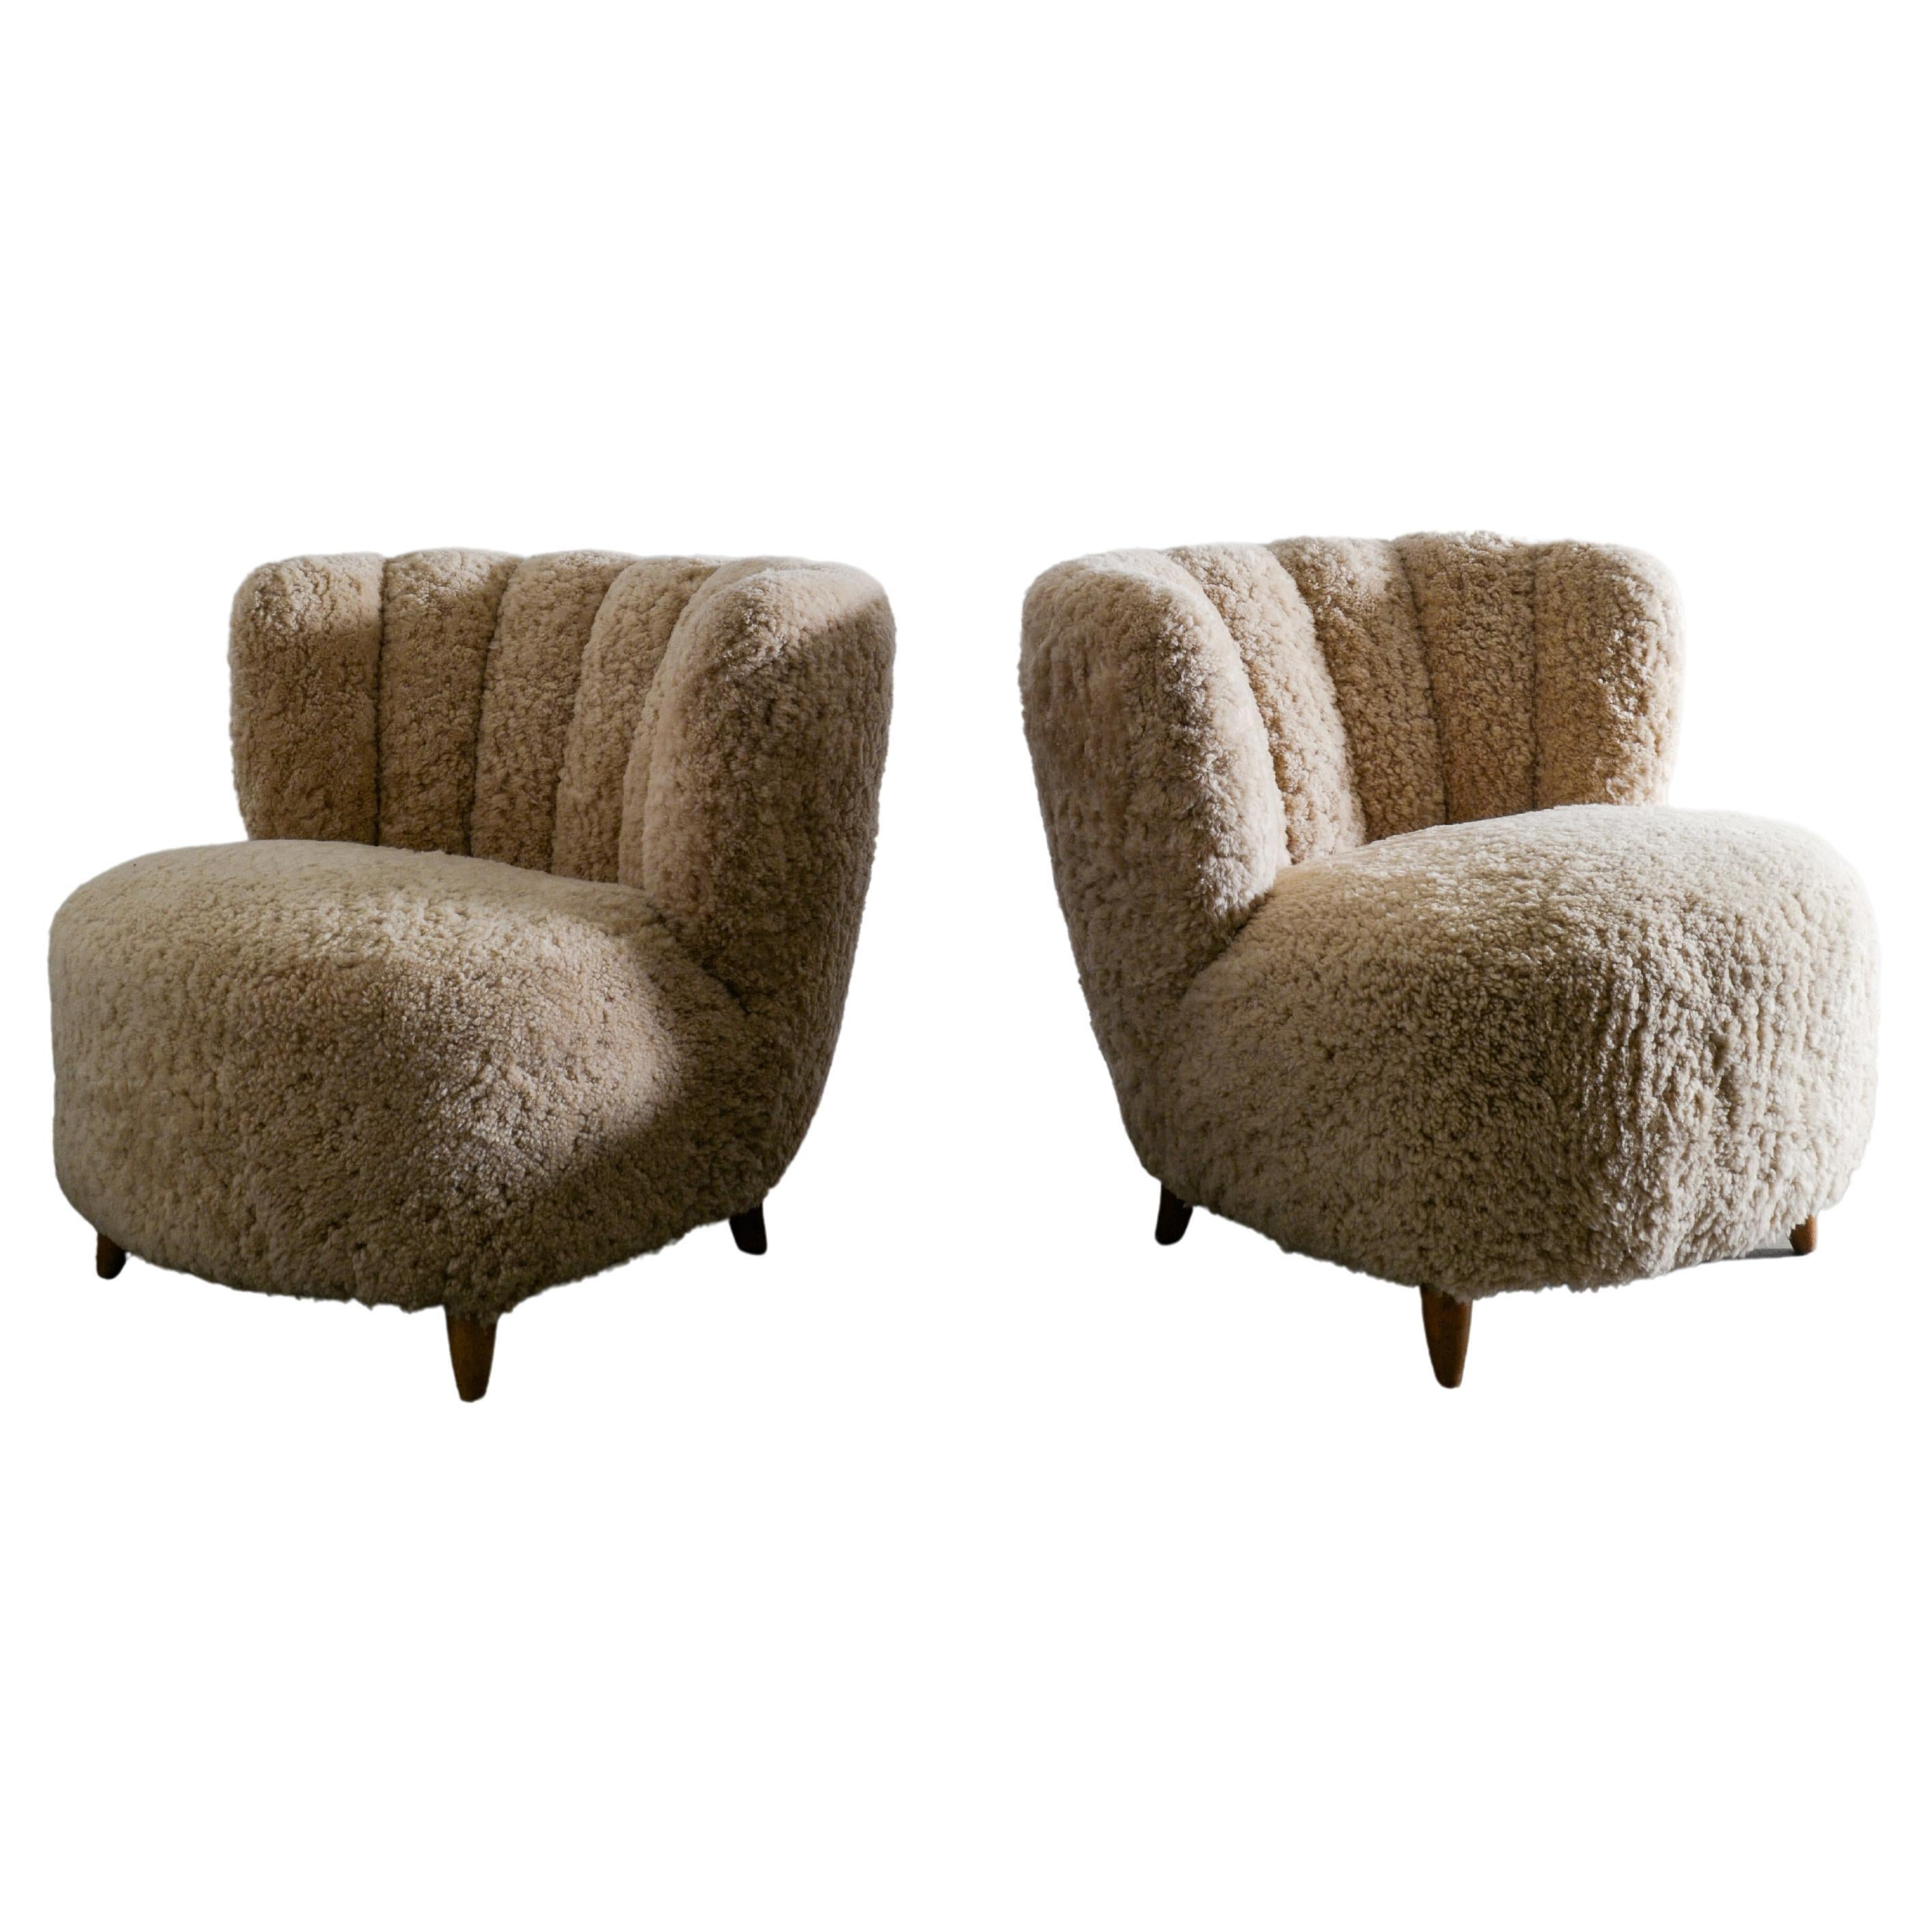 Pair of Curved Danish Easy Lounge Chairs in Sheepskin Produced in Denmark 1940s